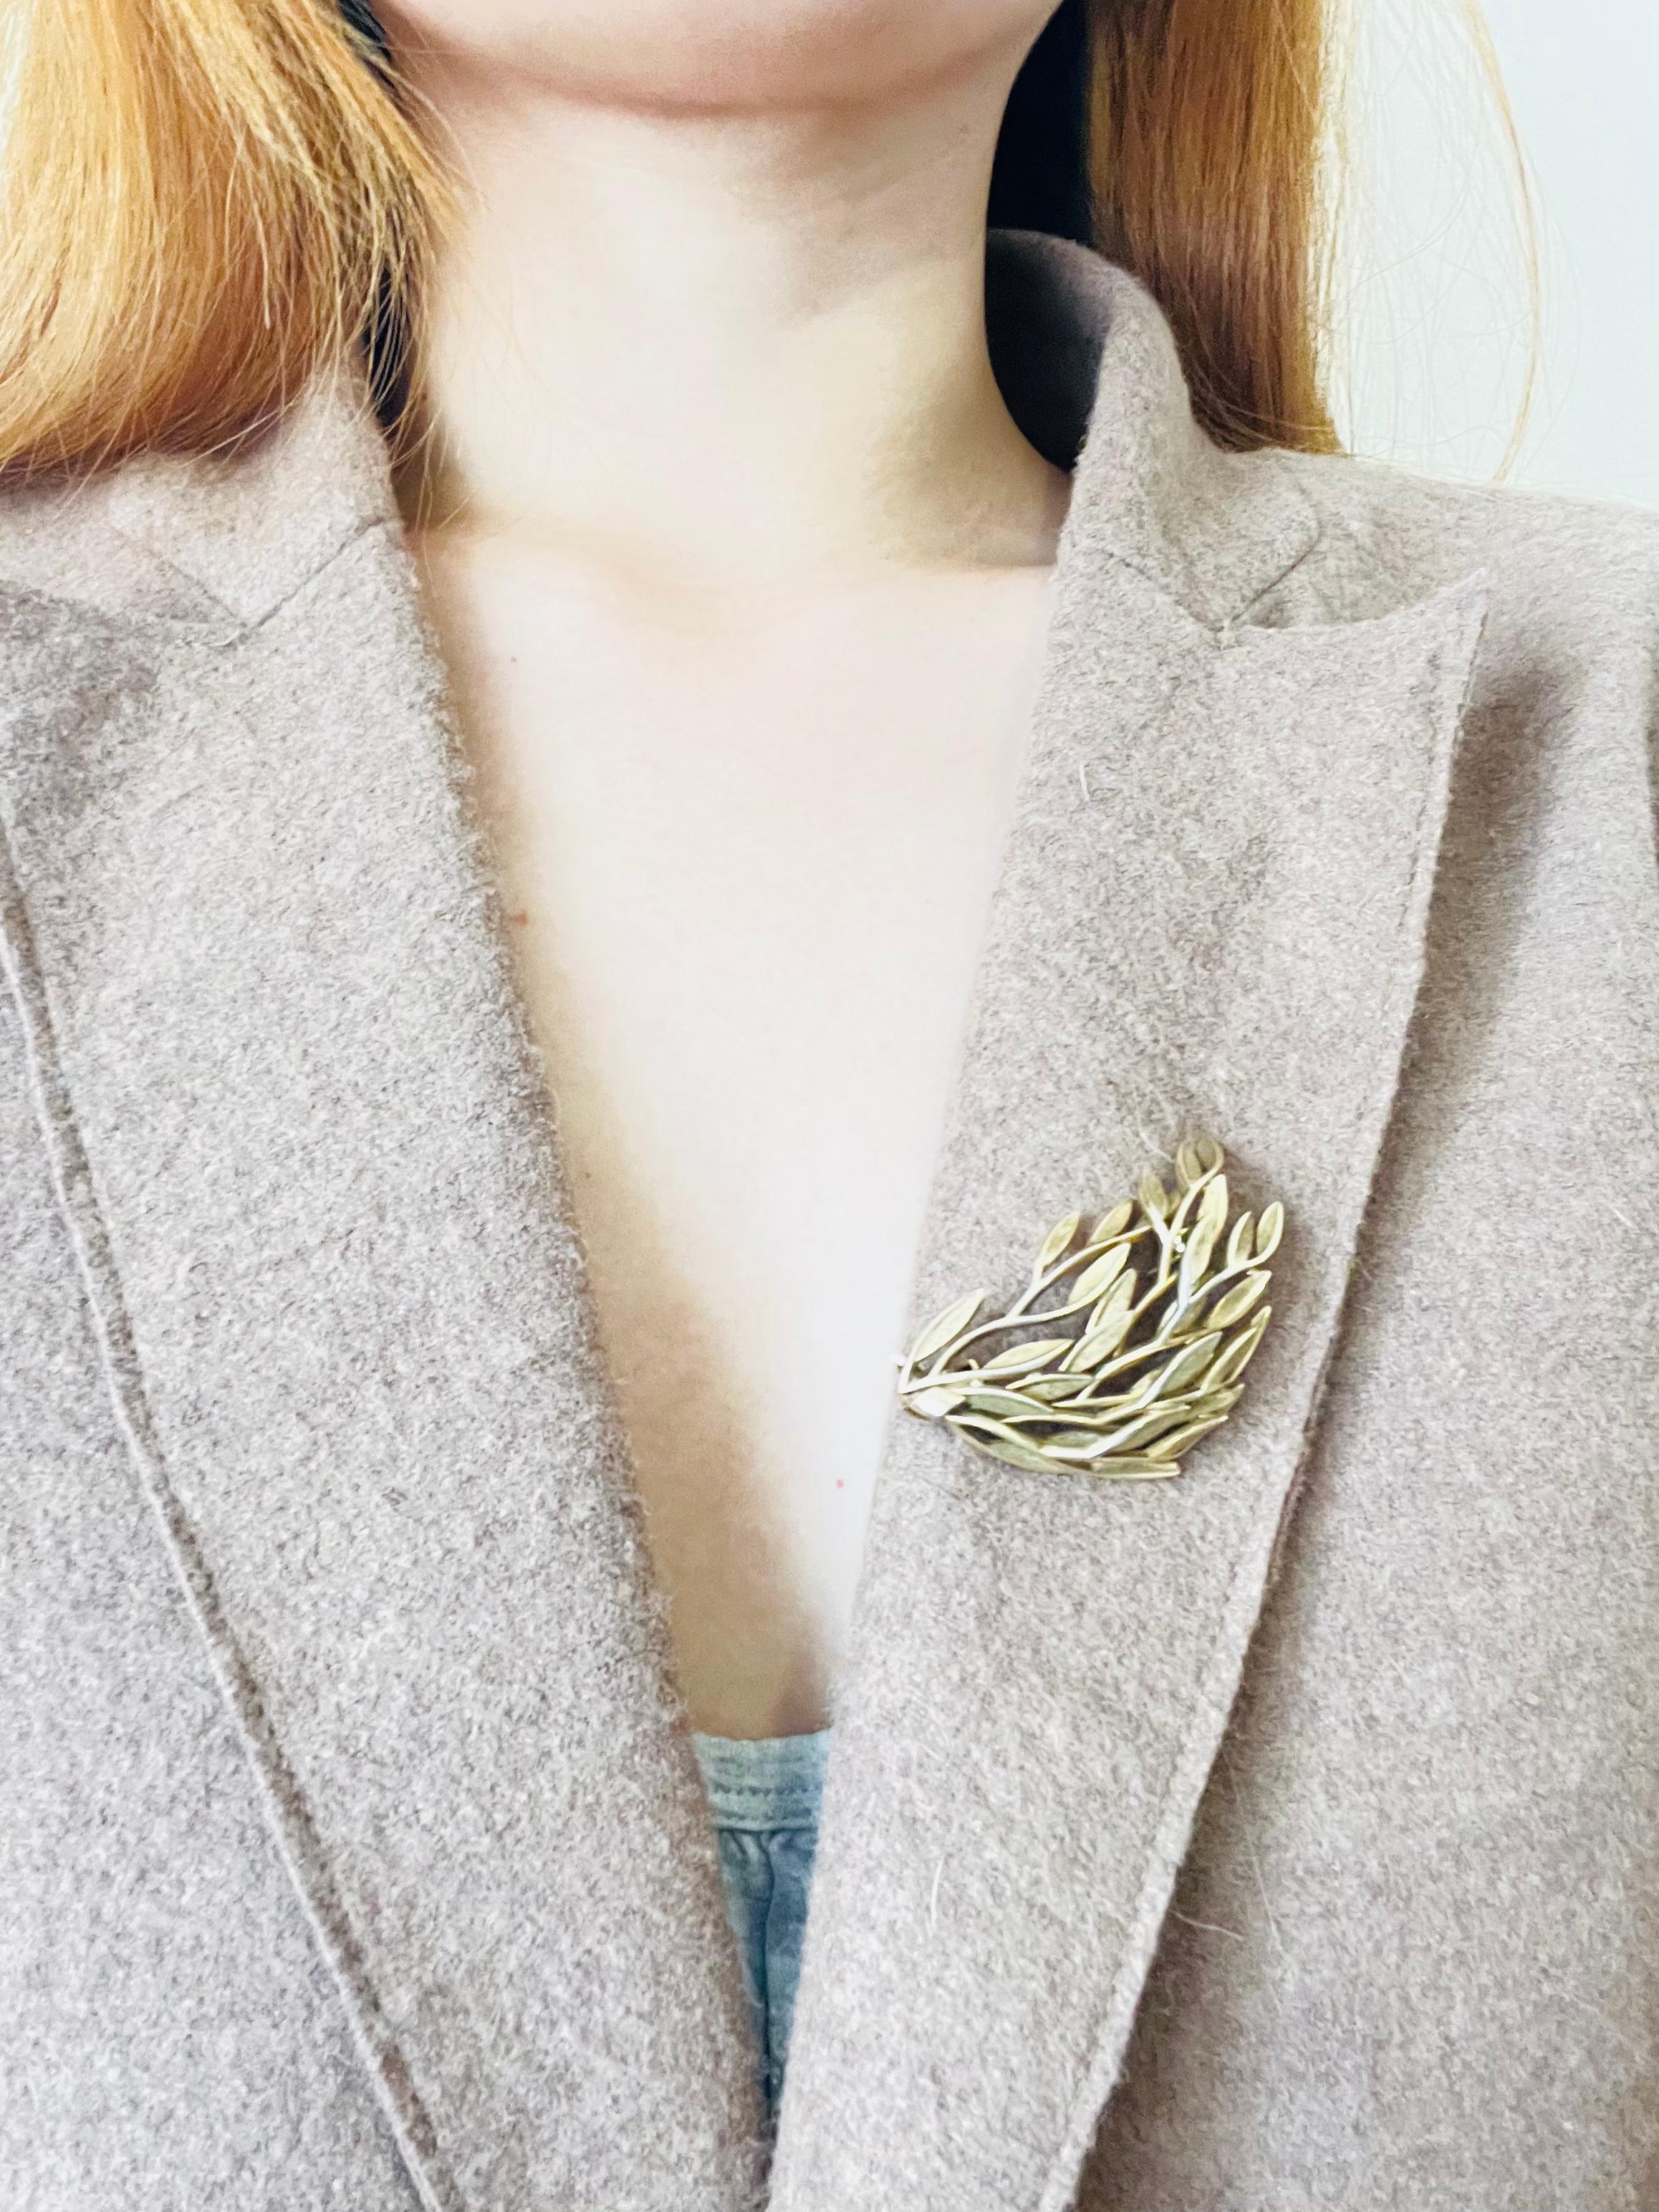 Christian Dior GROSSE 1958 Vintage Wave Swirl Leaf Feather Branch Gold Brooch  In Good Condition For Sale In Wokingham, England